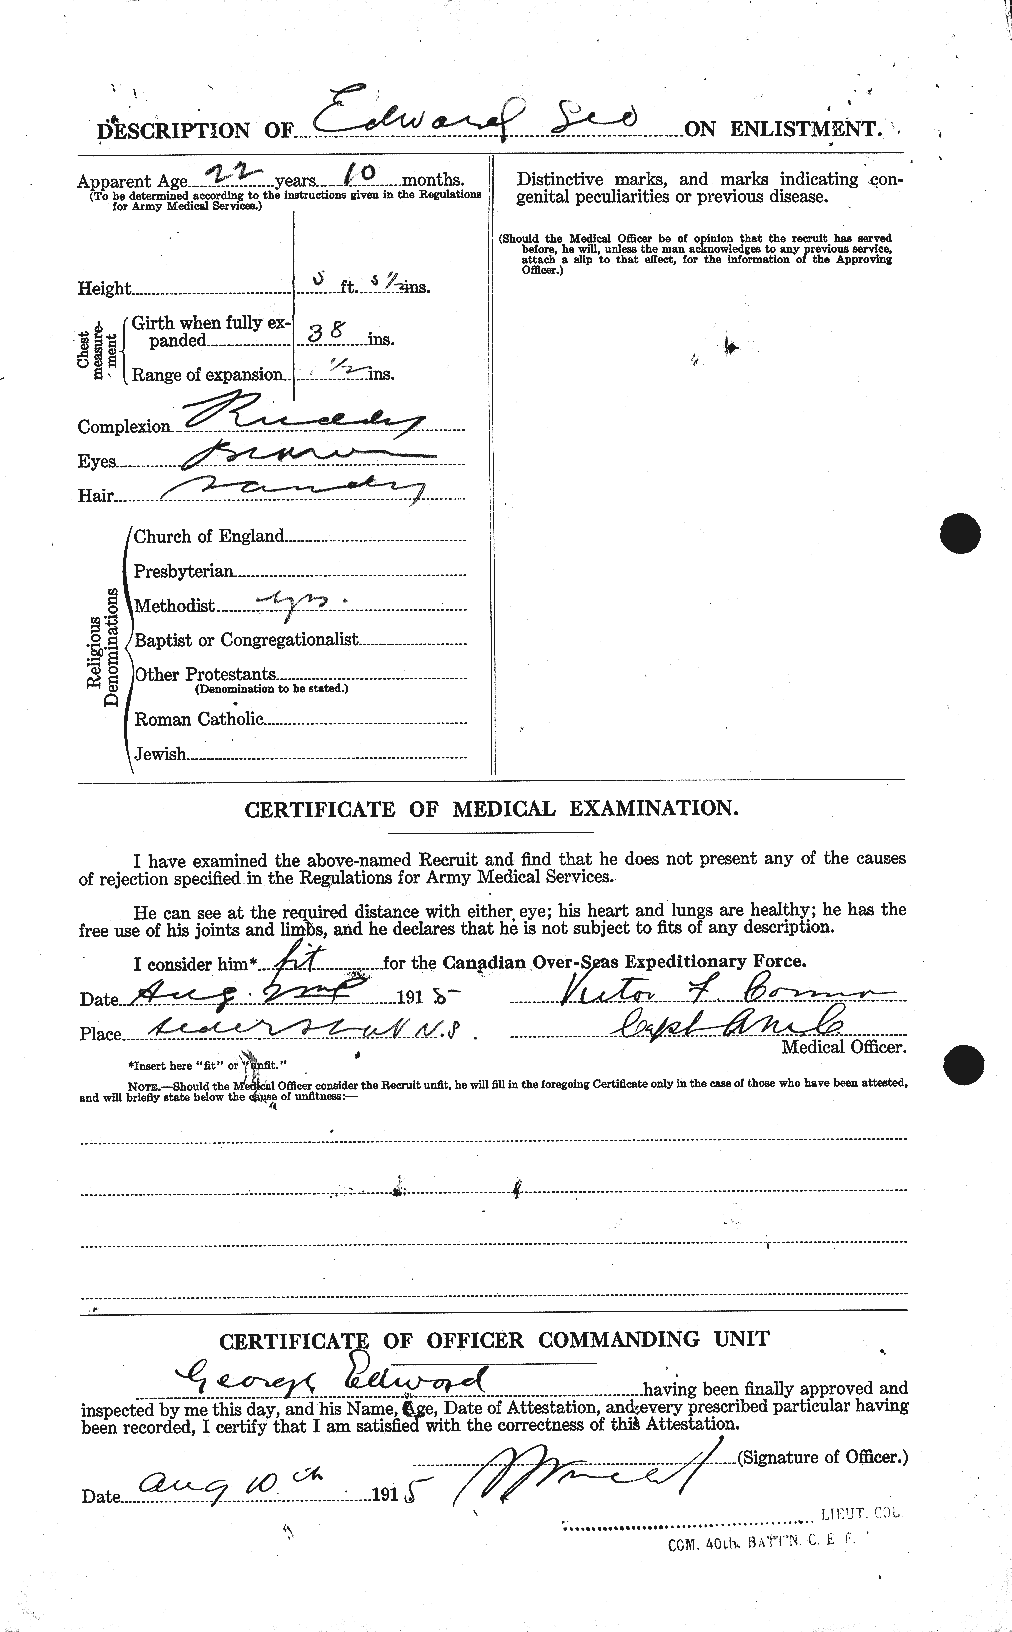 Personnel Records of the First World War - CEF 309096b